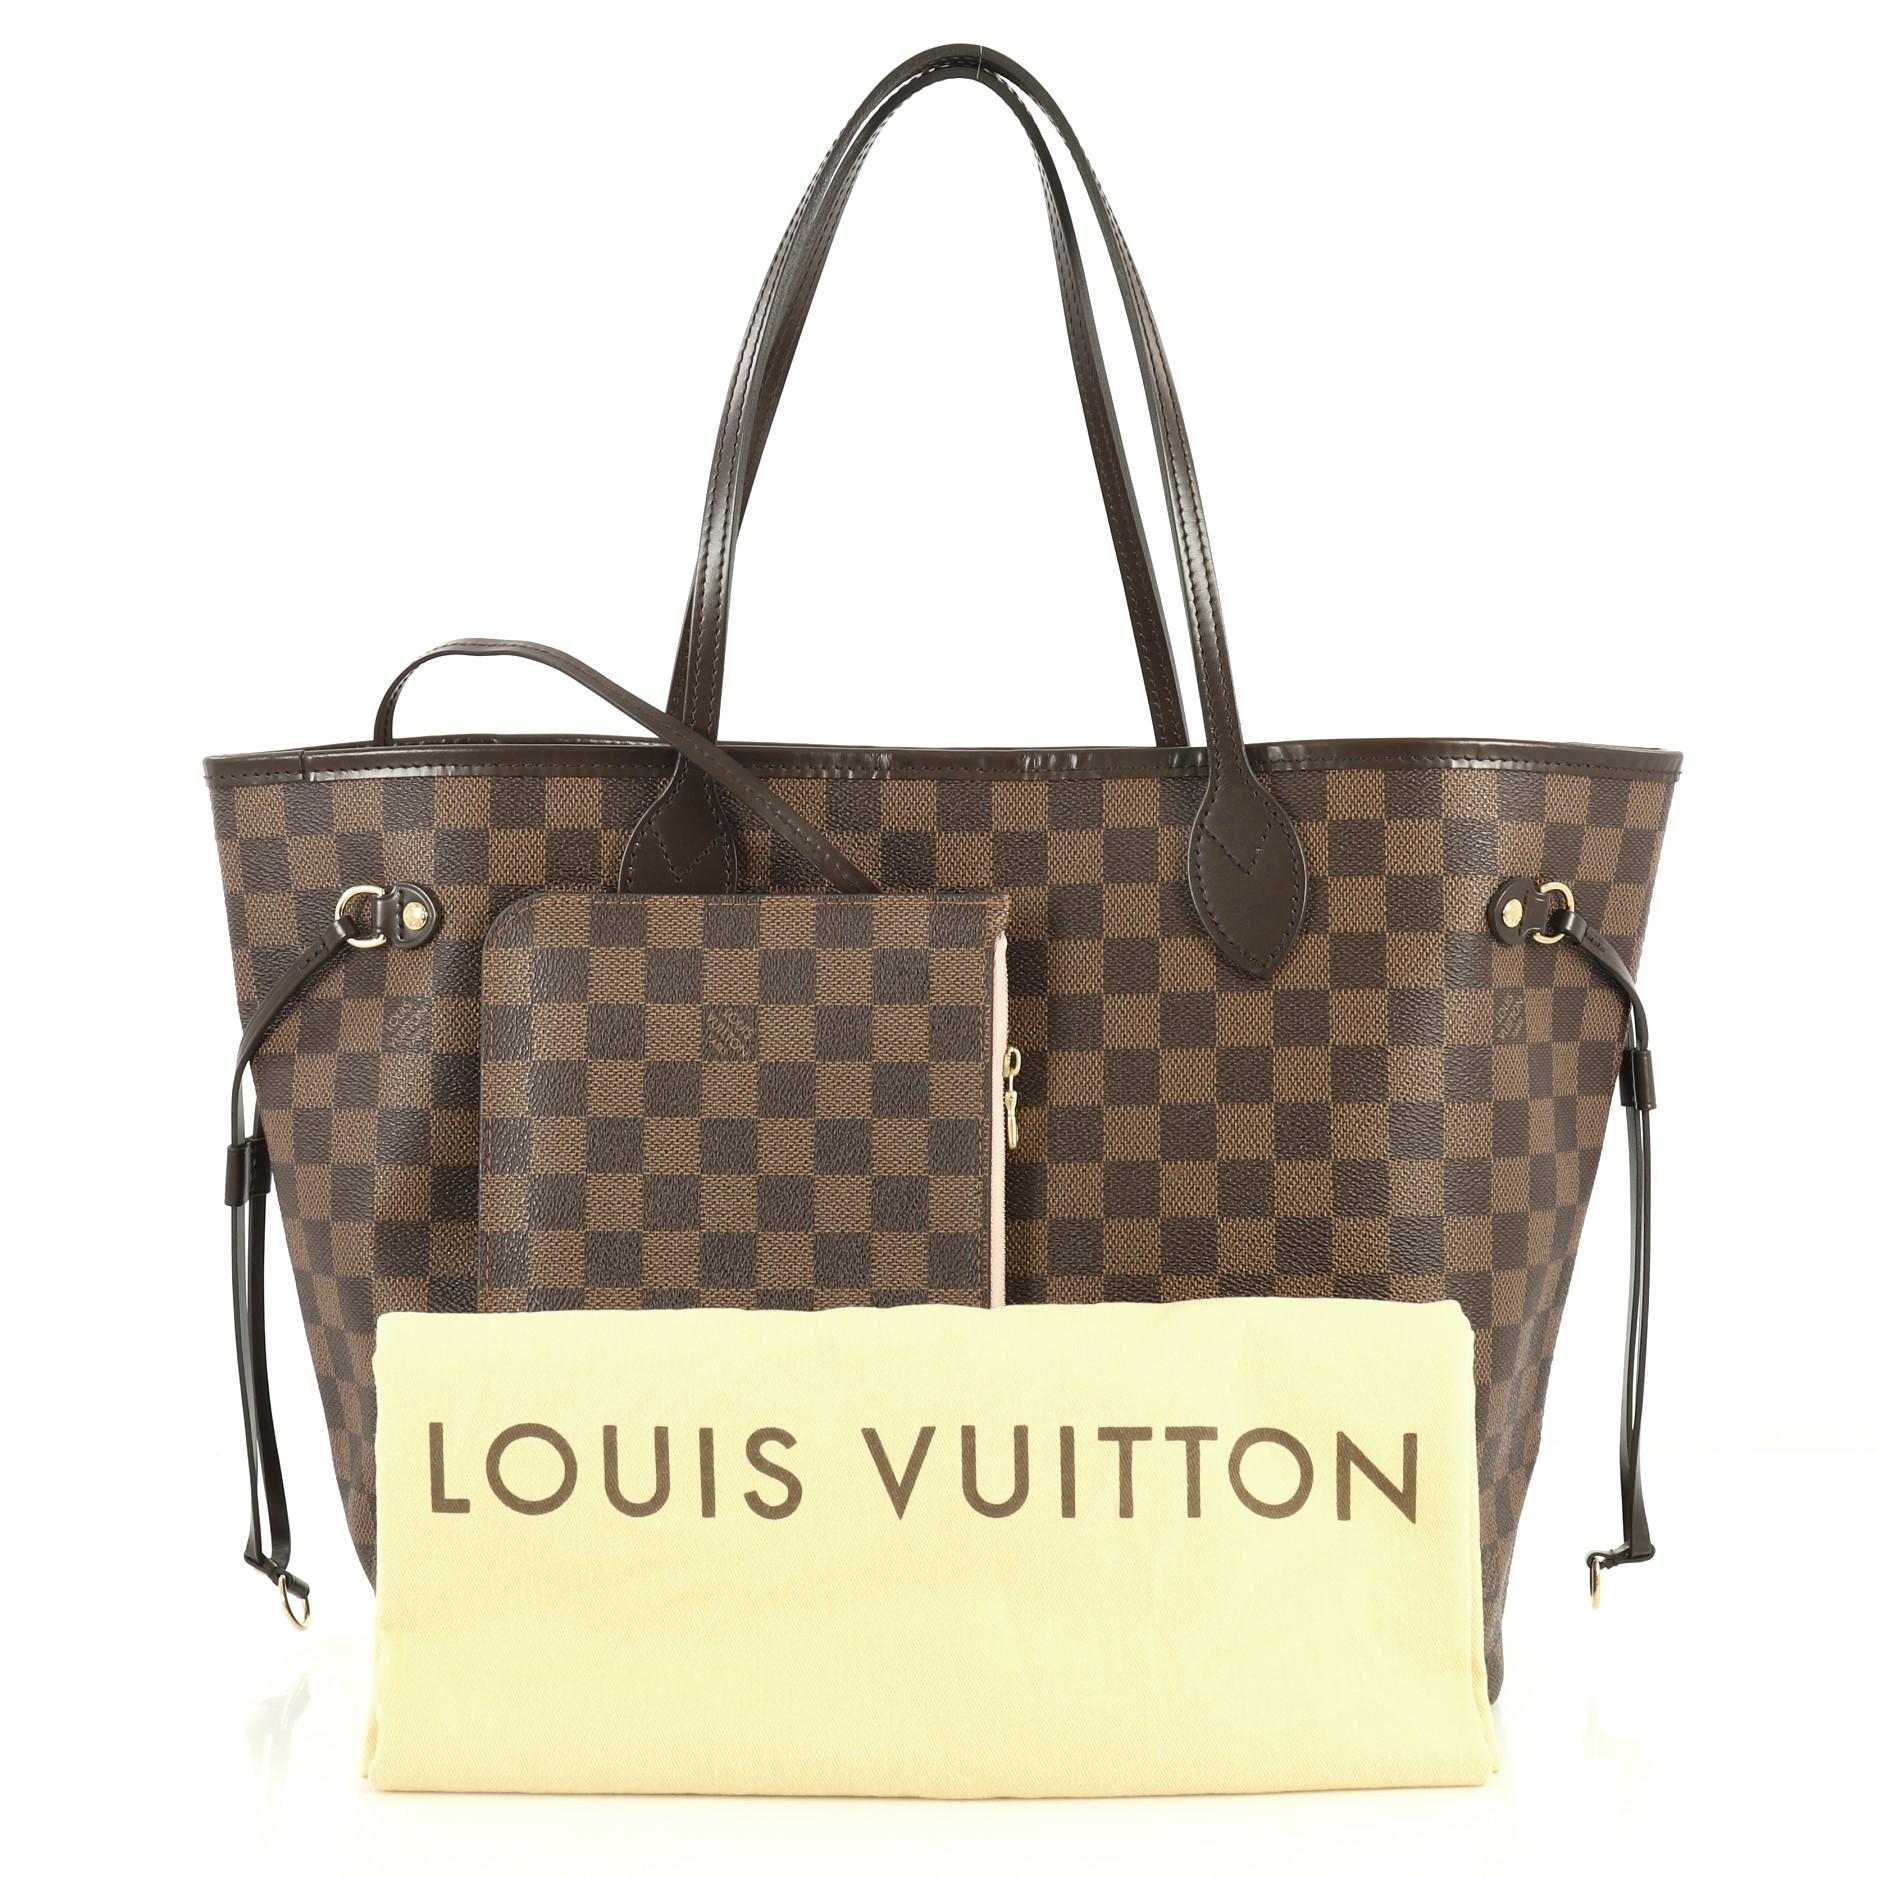 This Louis Vuitton Neverfull NM Tote Damier MM, crafted in damier ebene coated canvas, features dual slim leather handles, side laces and gold-tone hardware. Its wide open top showcases a pink fabric interior with side zip pocket. Authenticity code